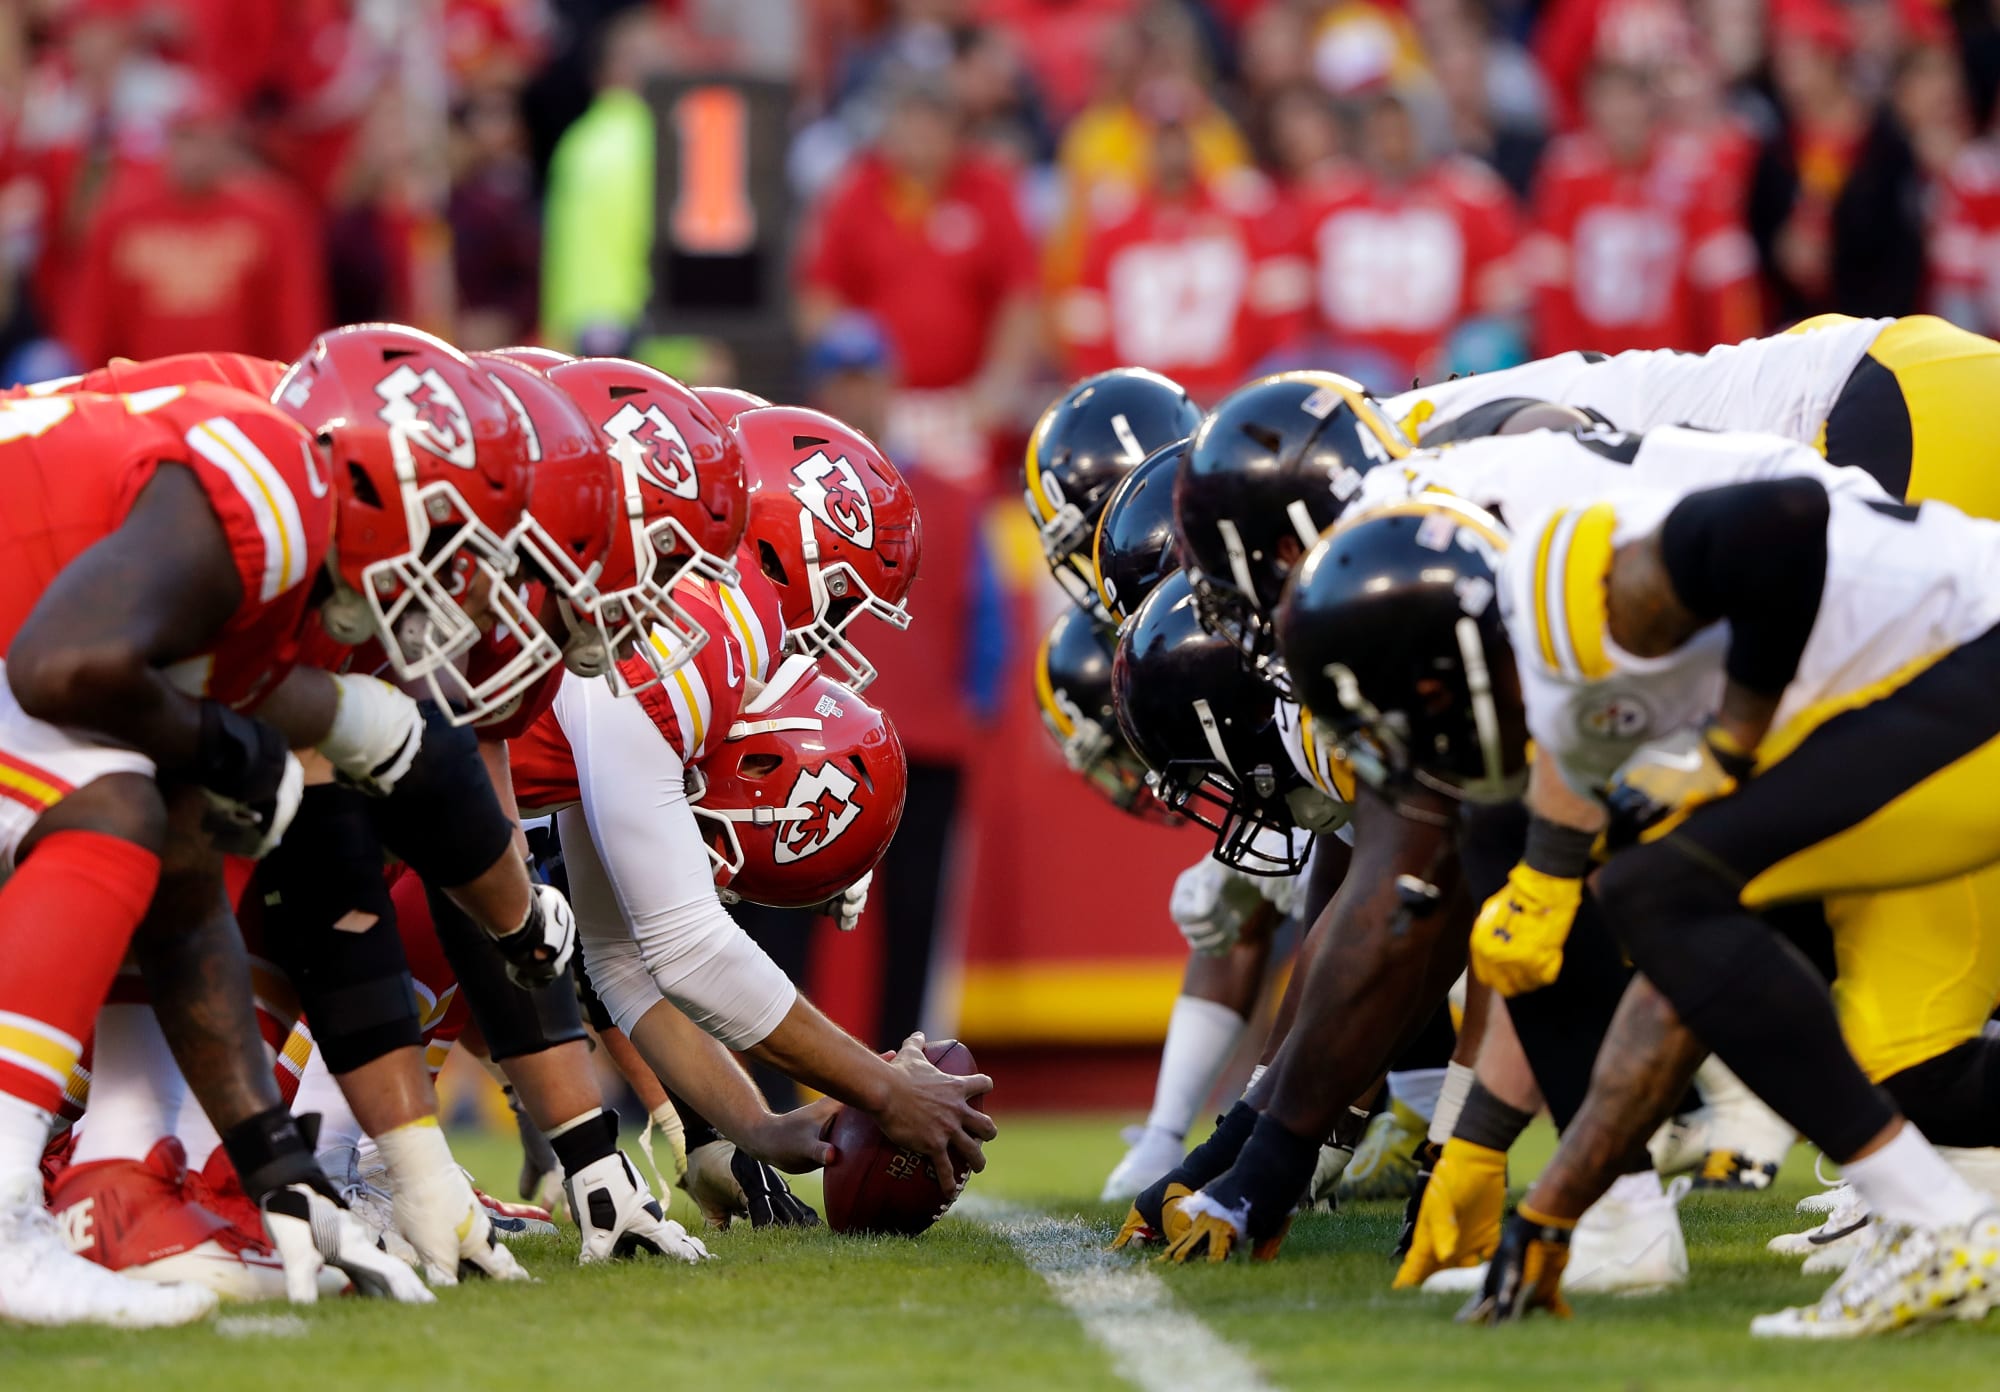 Kansas City Chiefs loss to Steelers happened in the trenches